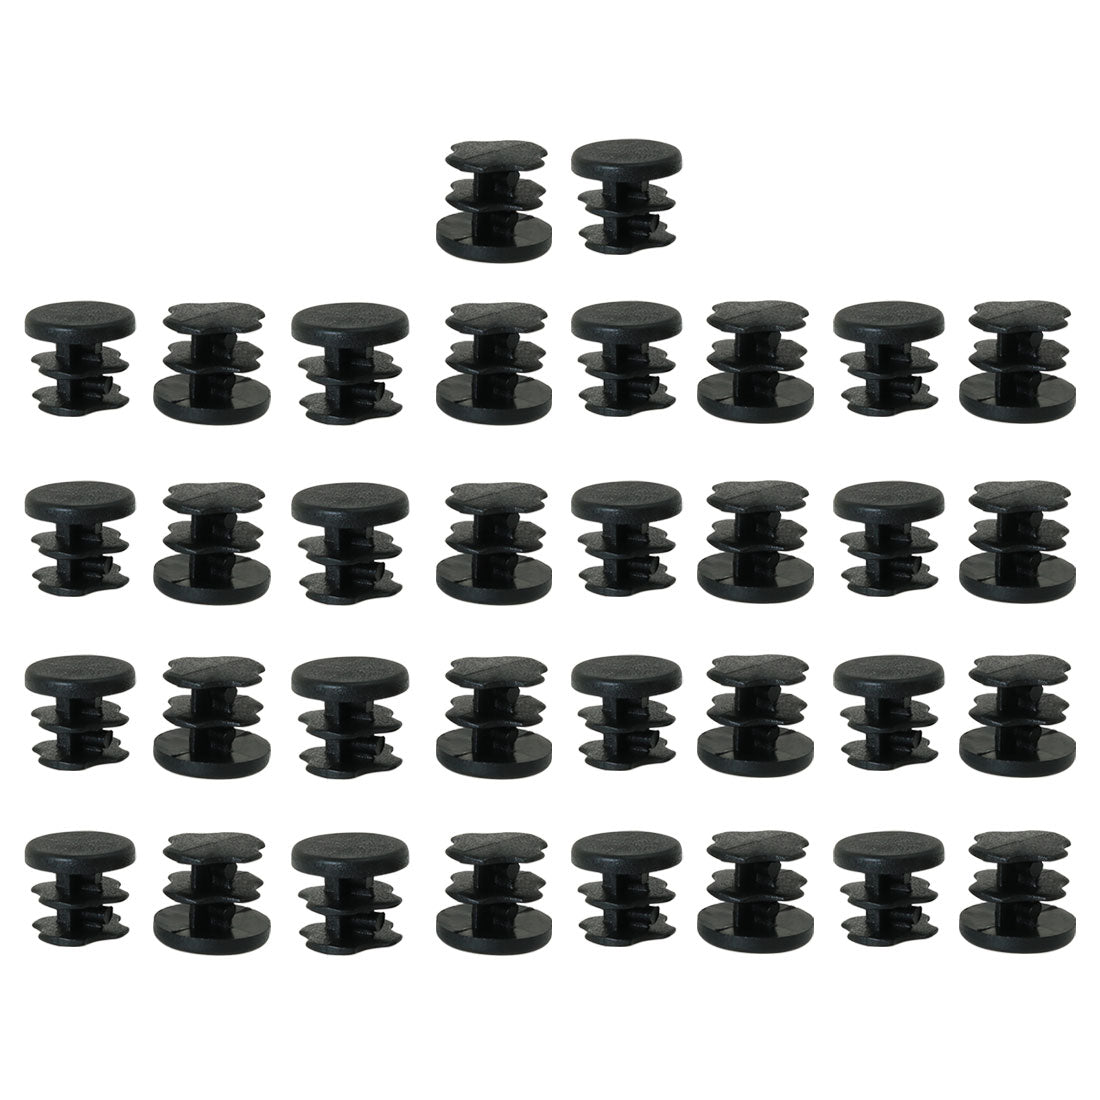 Uxcell Uxcell 3/4" 0.75" OD Plastic Round Tube Insert Glide End Cap Pad 34pcs 0.63"-0.71" Inner Dia for Furniture Anti Scratch Easily Move